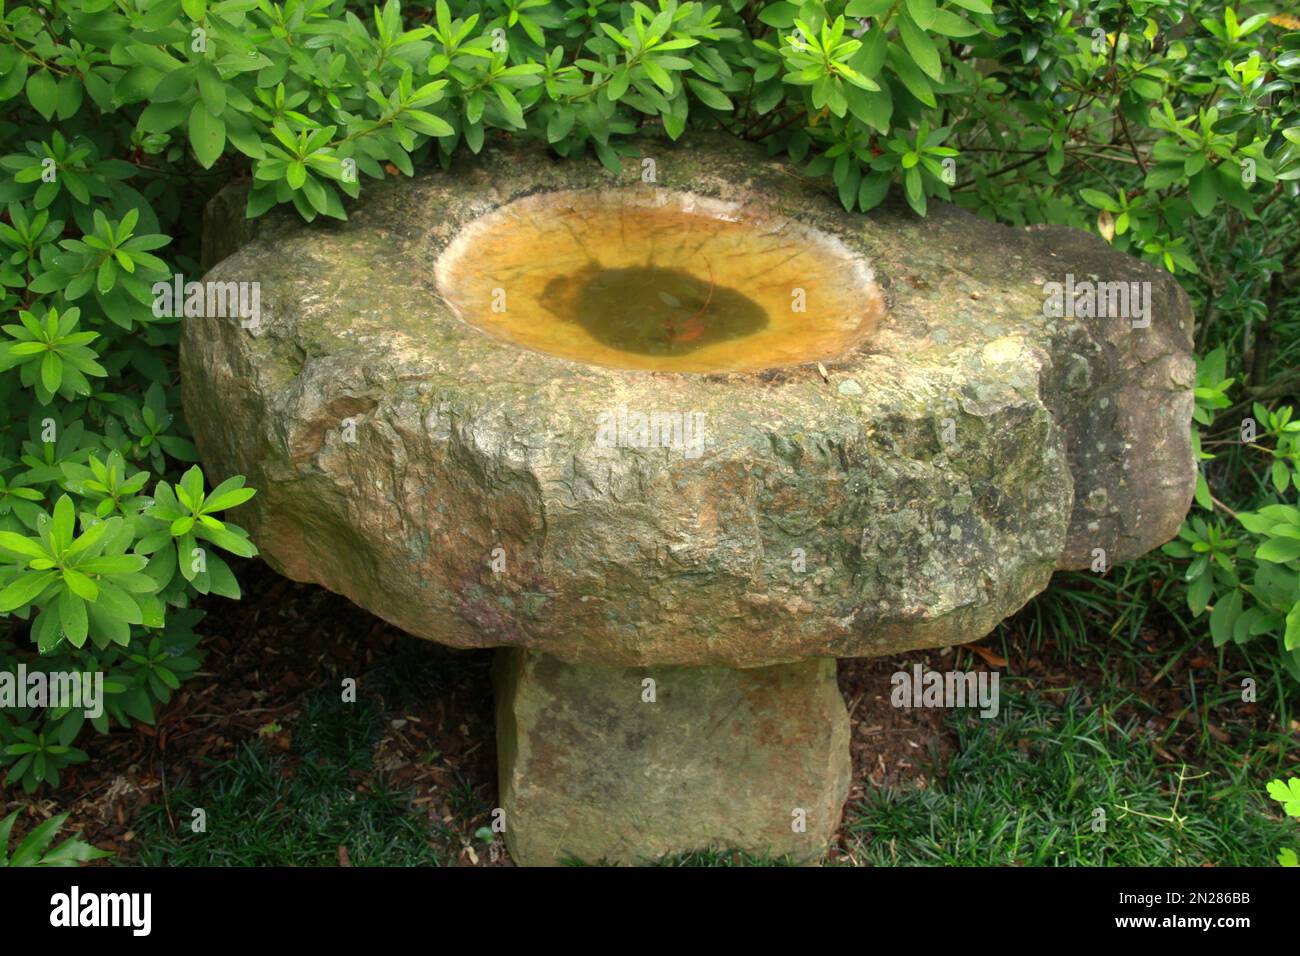 Artwork on the grounds of the UNC Charlotte Botanical Gardens, NC, USA Stock Photo